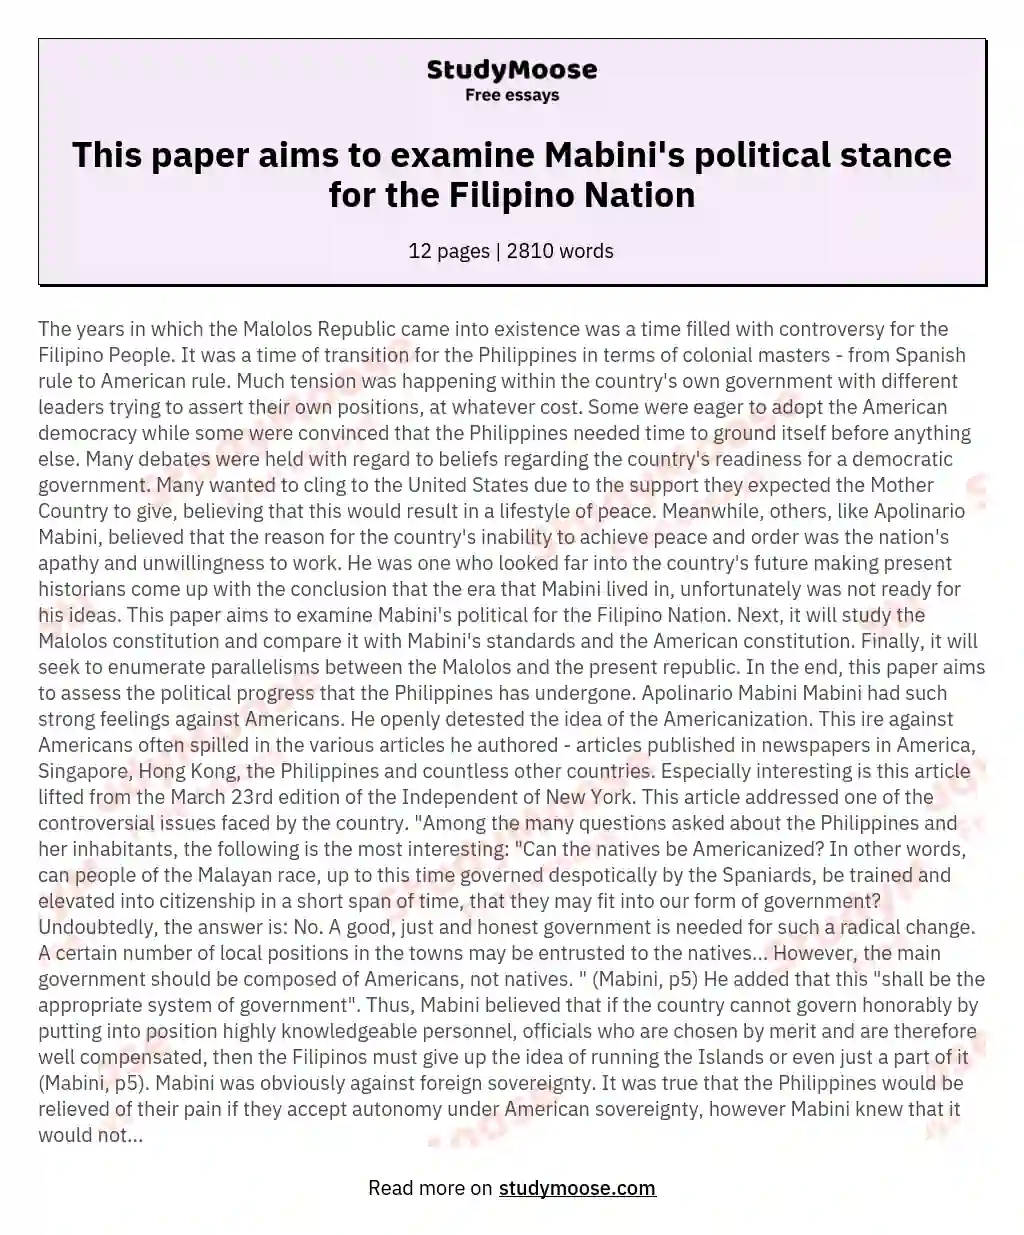 This paper aims to examine Mabini's political stance for the Filipino Nation